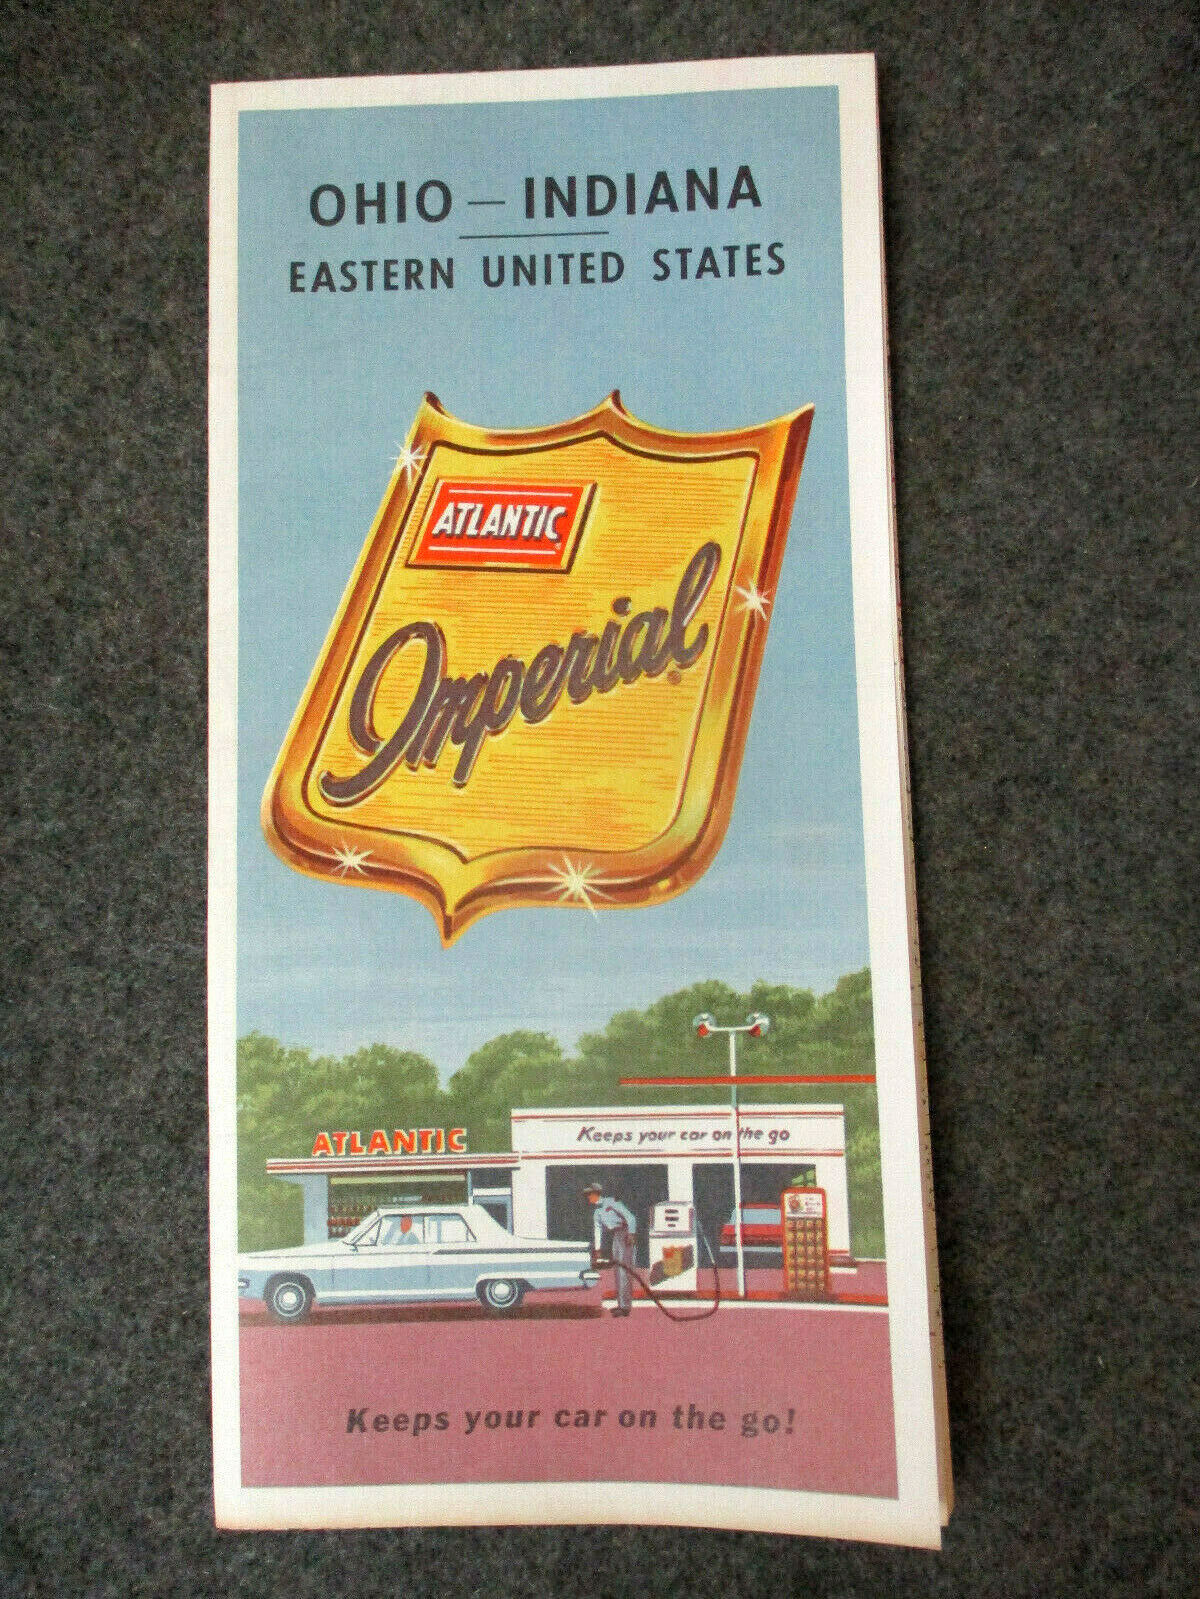 Vintage ATLANTIC Imperial OHIO- INDIANA Highway Road Gas Station Travel Map 1964